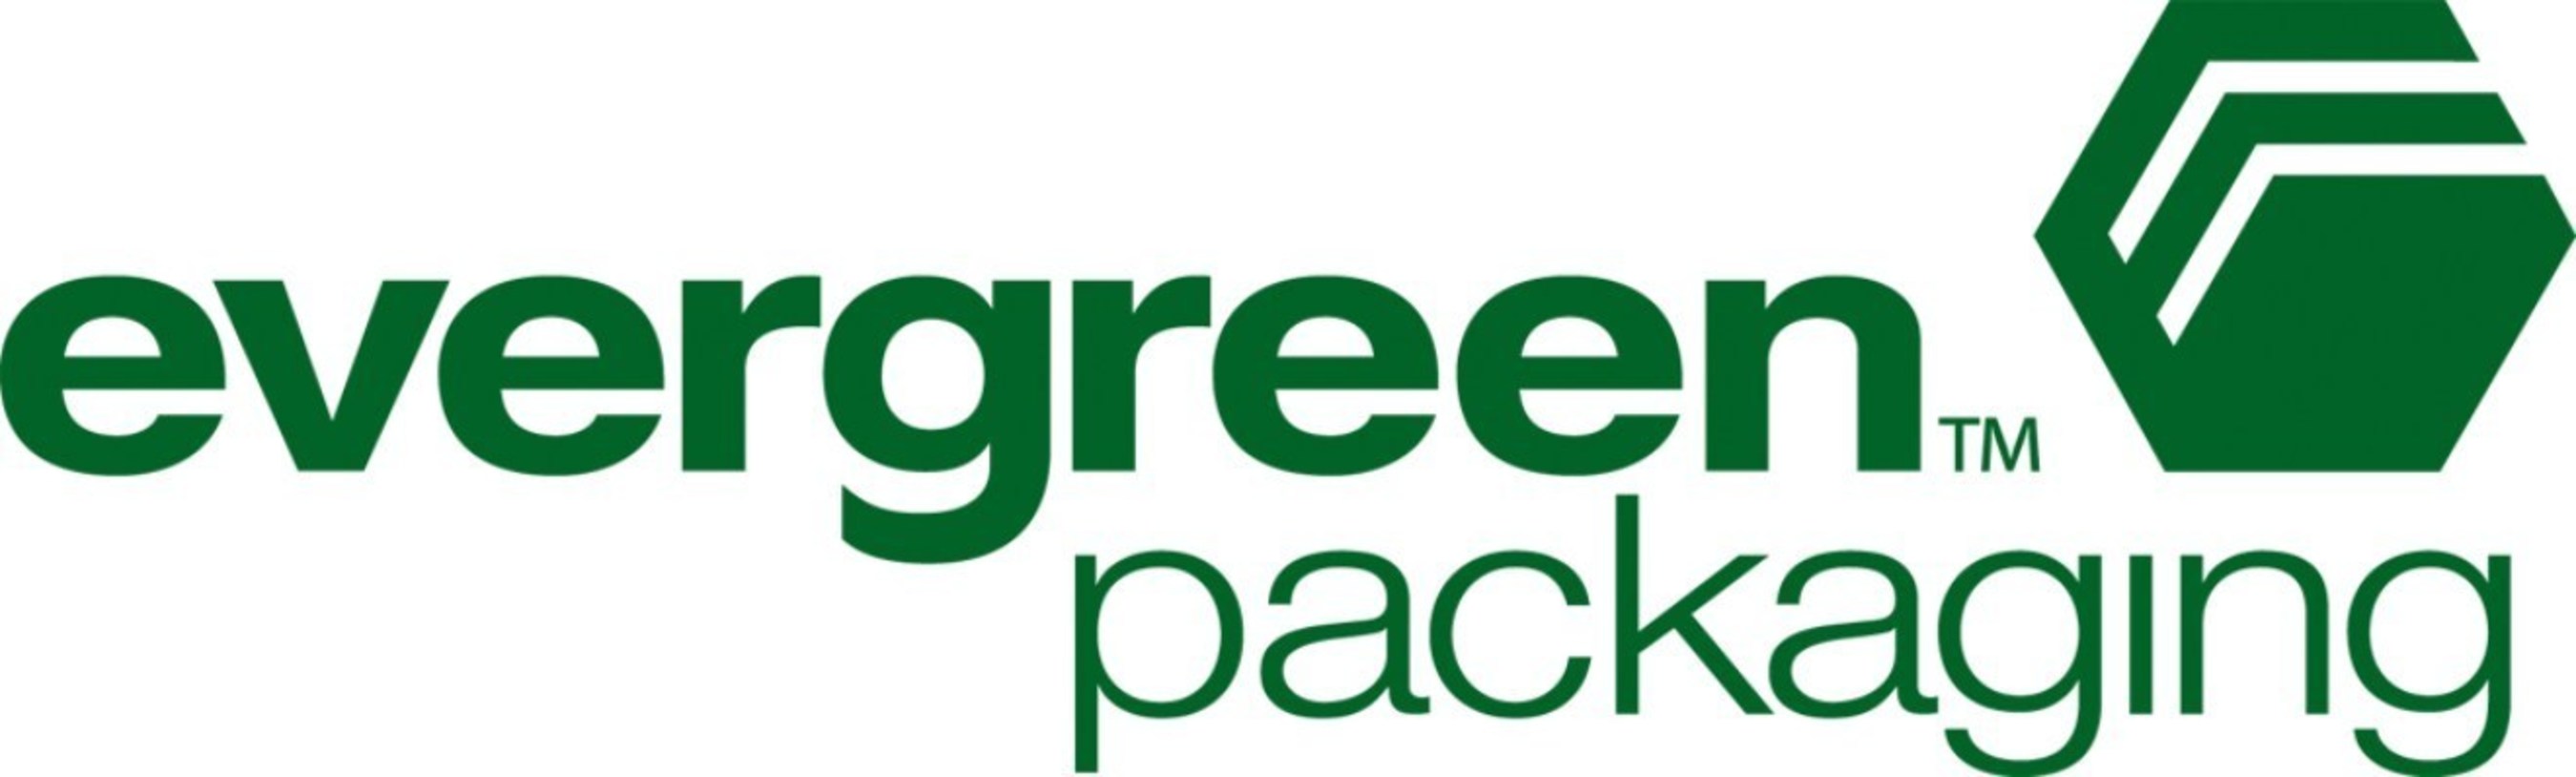 Evergreen Packaging recognized by AF&PA with 2014 Leadership in Sustainability Award for Sustainable Forest Management.